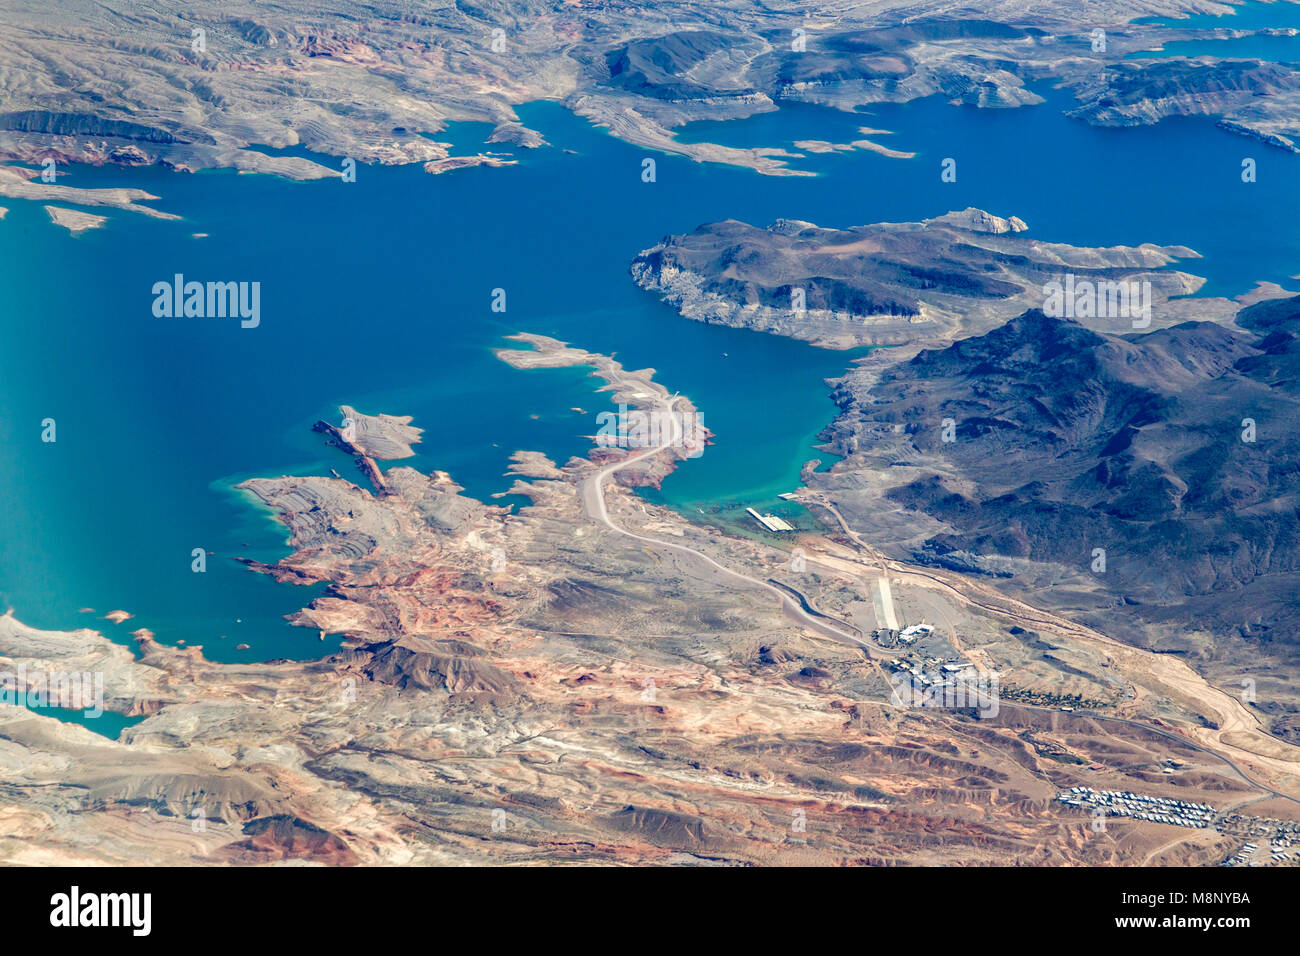 Lake Mead on the Colorado River, about 24 mi from the Las Vegas Strip, southeast of the city of Las Vegas, Nevada, in the states of Nevada and Arizona Stock Photo